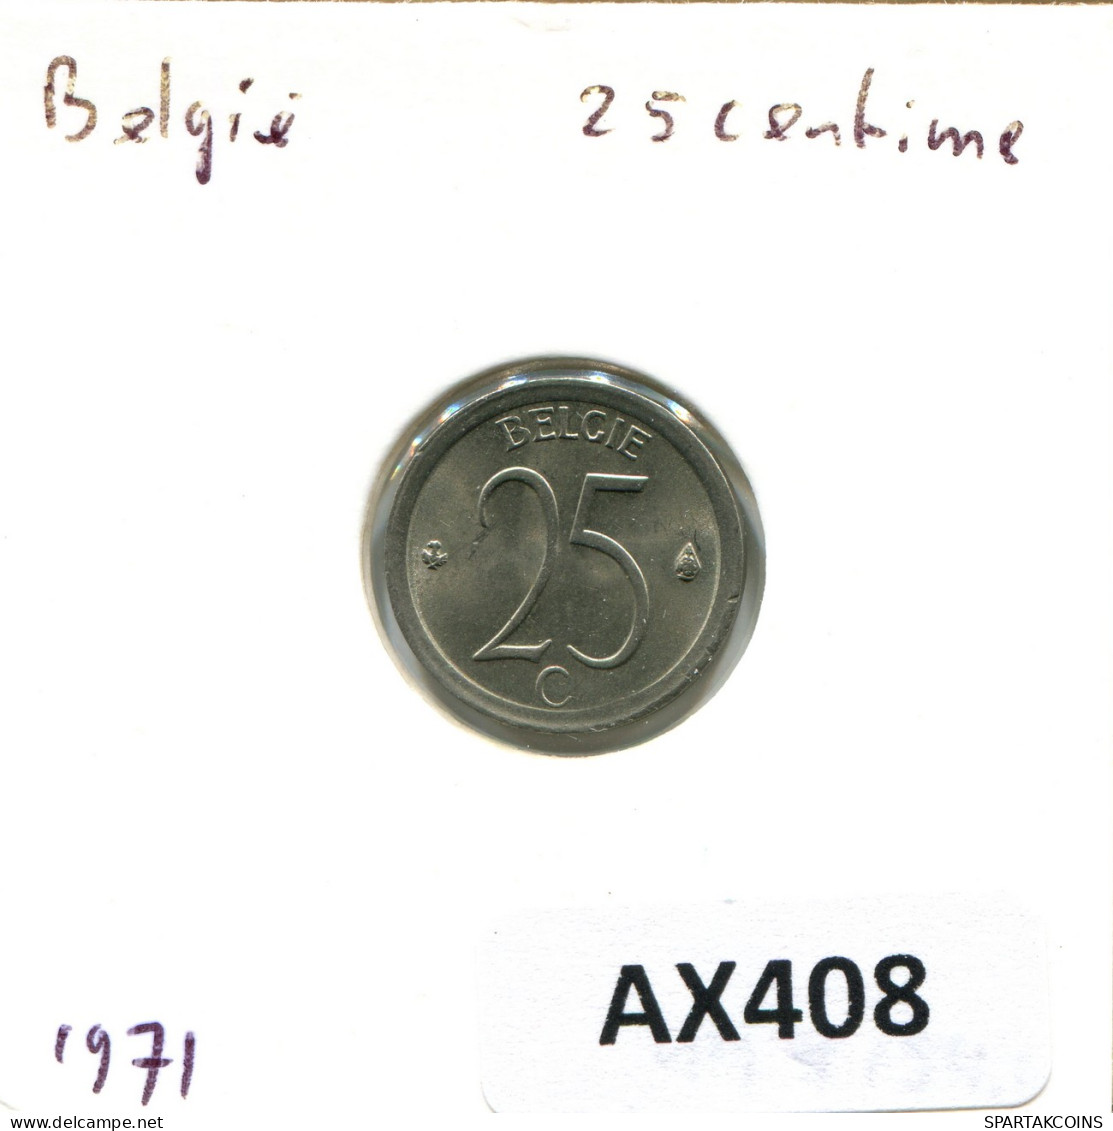 25 CENTIMES 1971 FRENCH Text BELGIUM Coin #AX408.U - 25 Cent